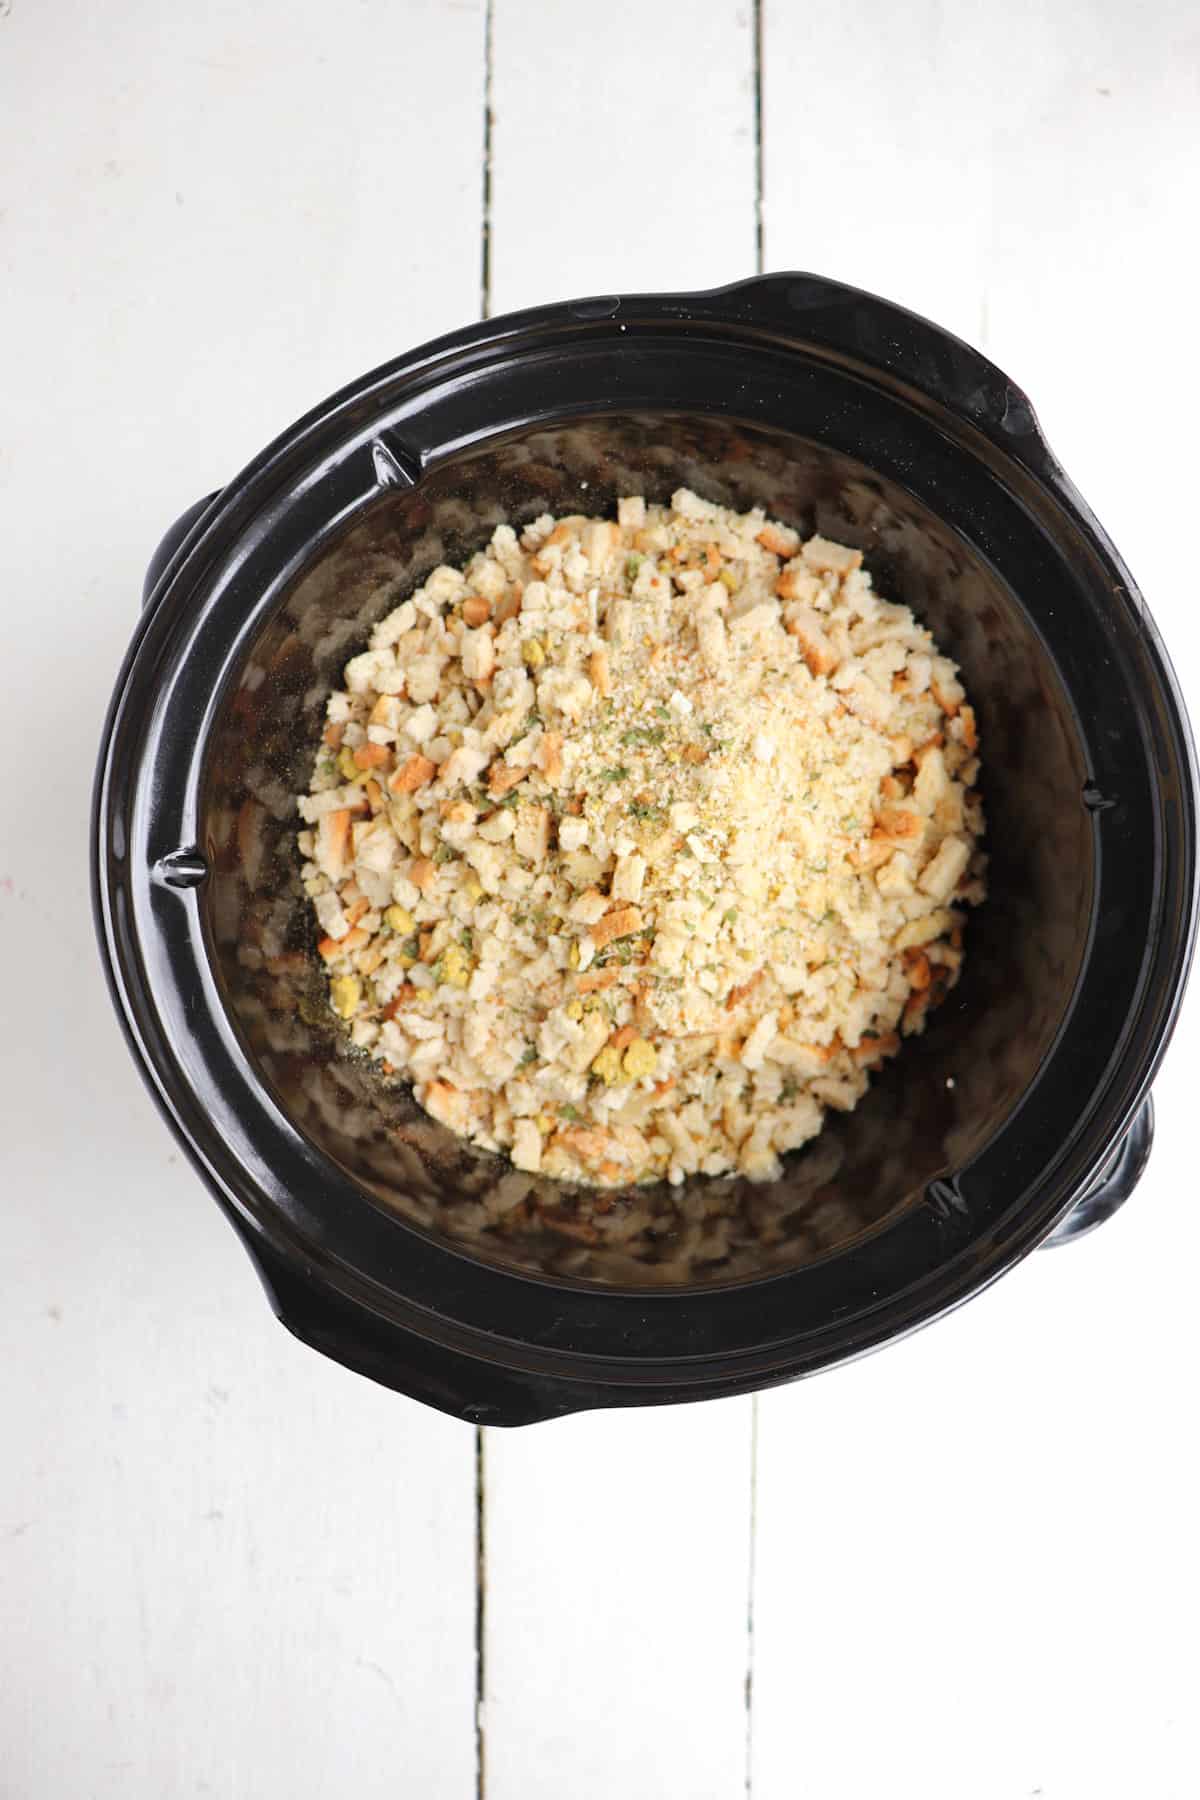 dry stuffing in crockpot.